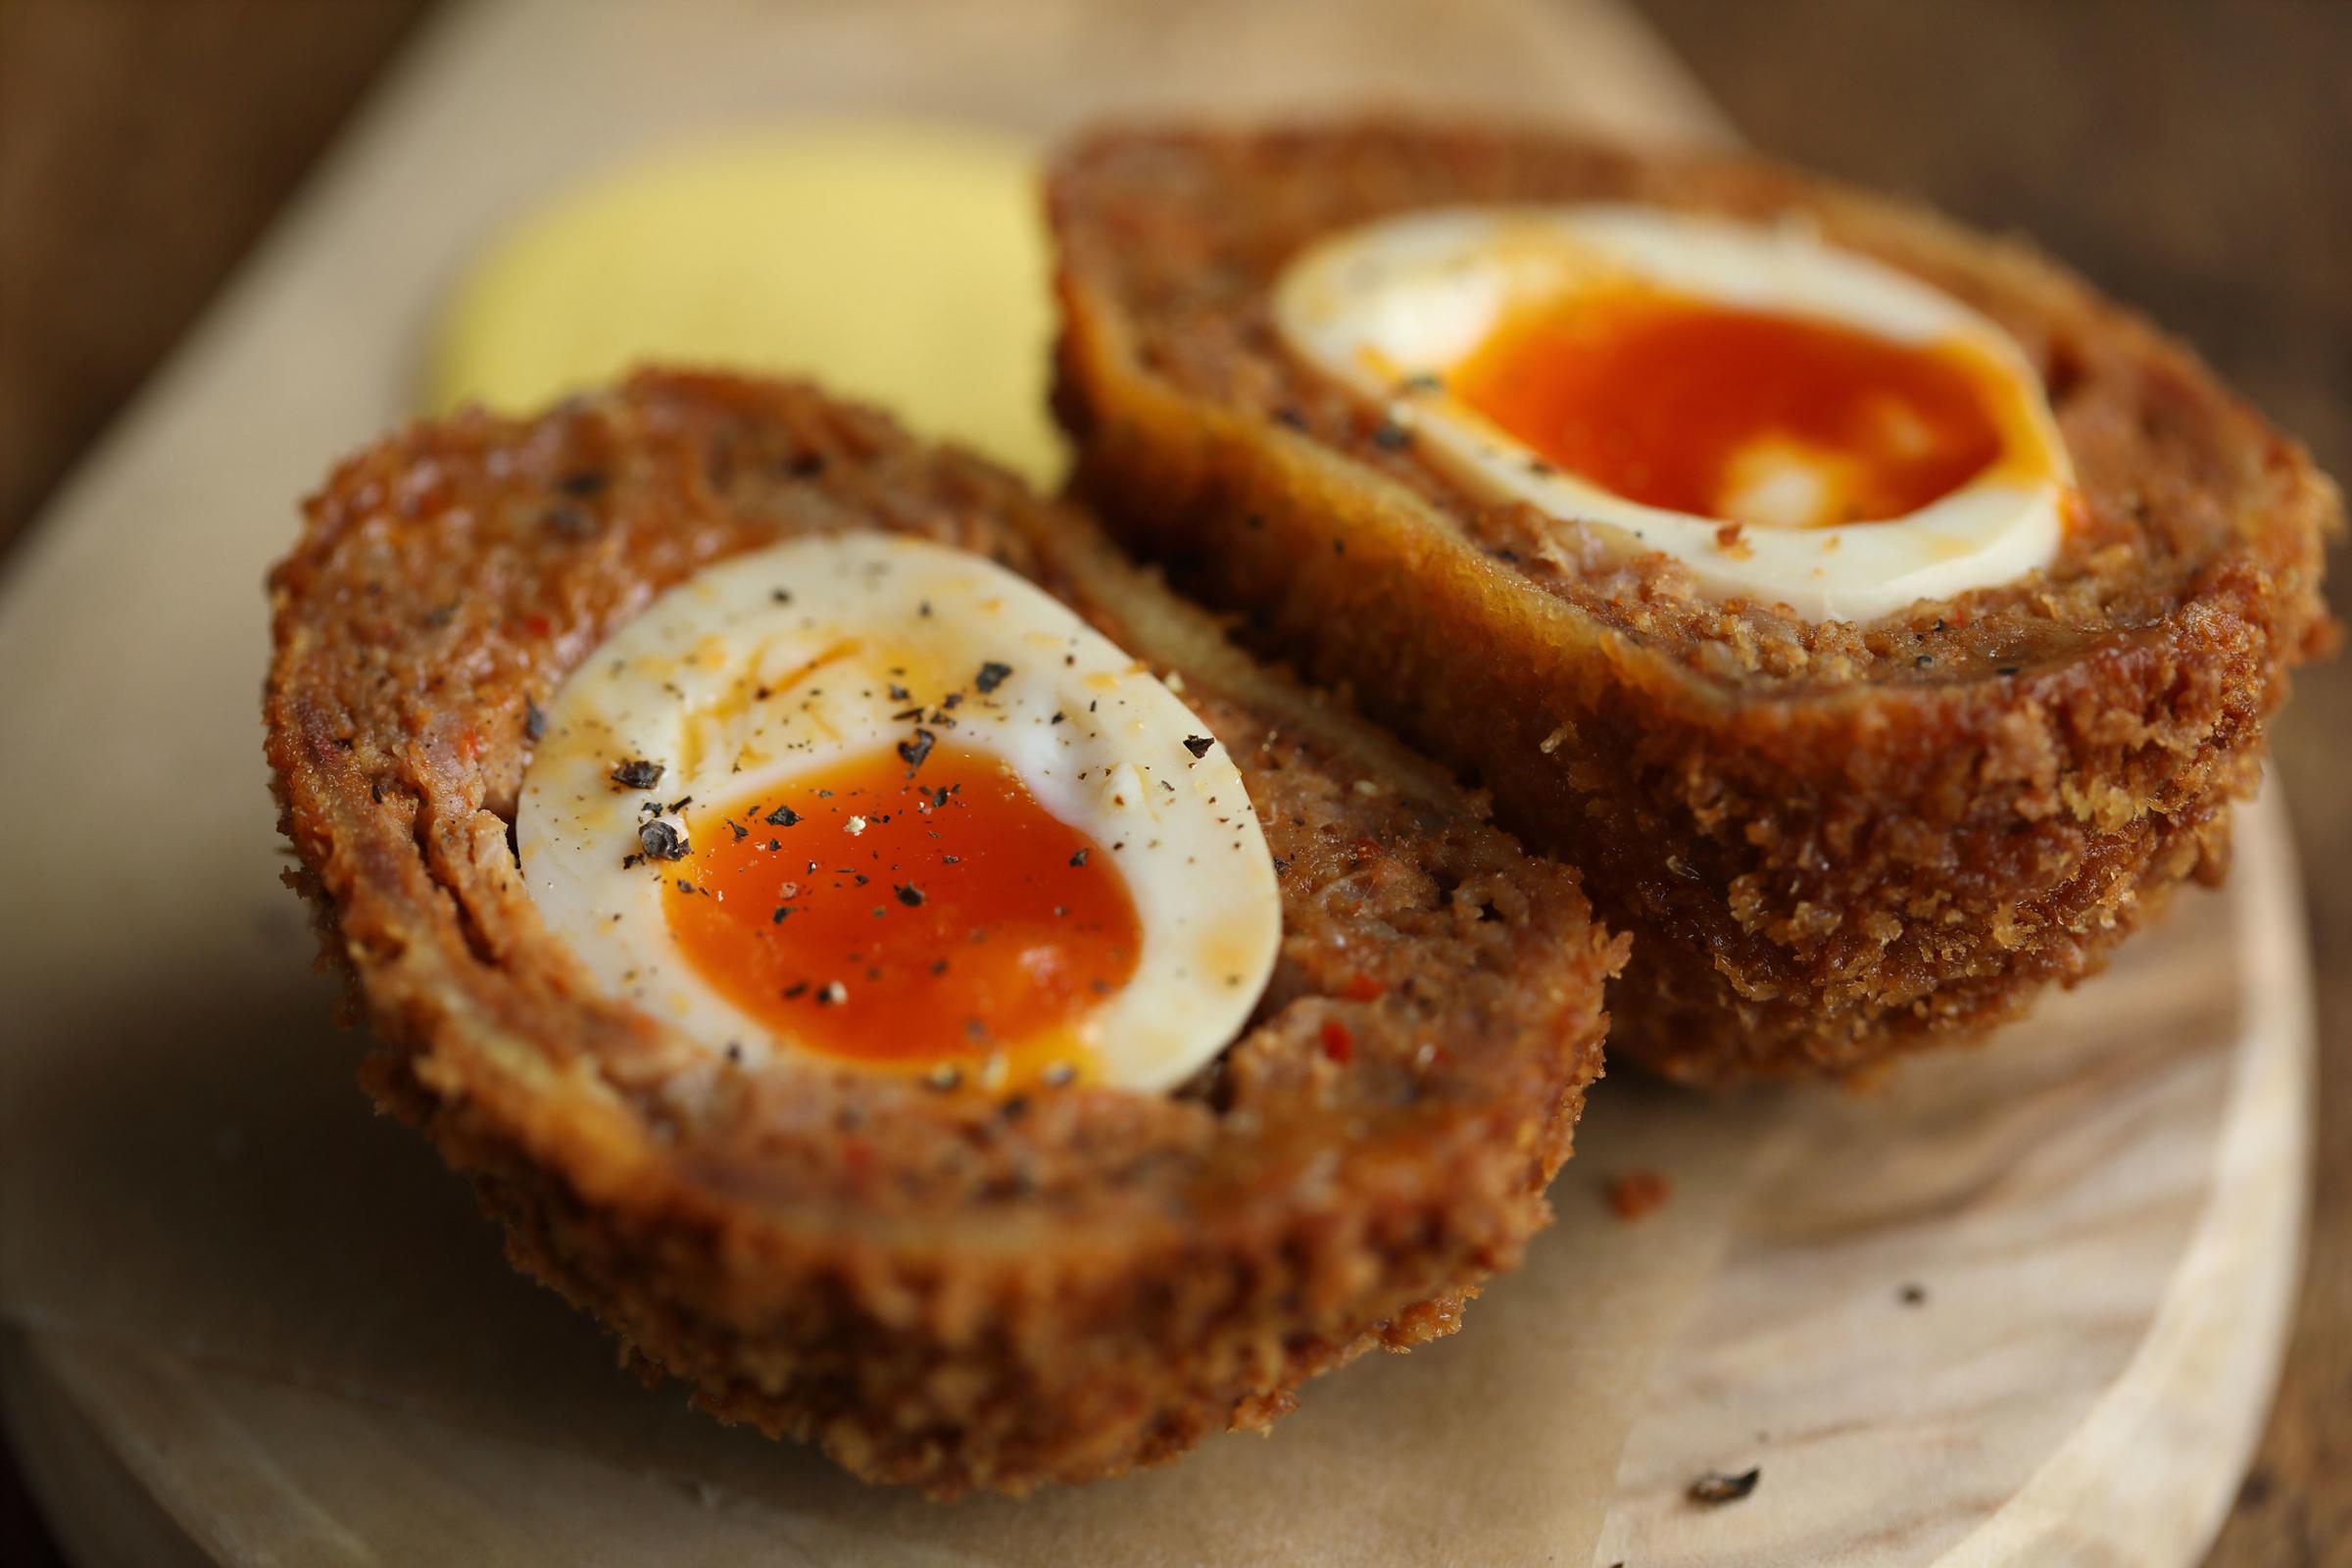 Scotch eggs at The Harcourt Arms.